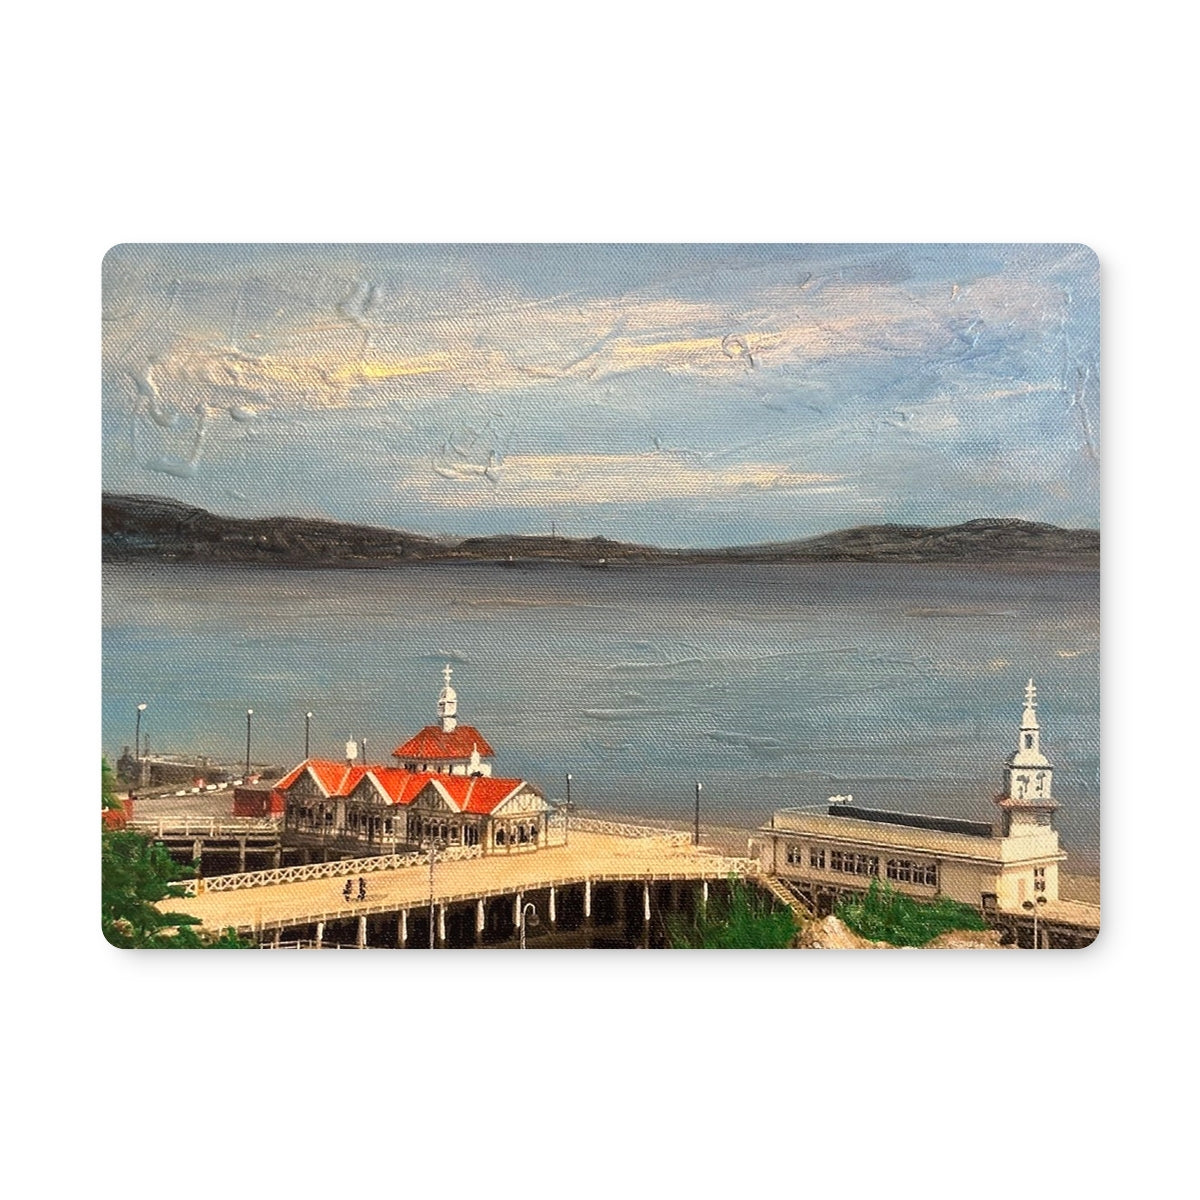 Looking From Dunoon Art Gifts Placemat-Placemats-River Clyde Art Gallery-Single Placemat-Paintings, Prints, Homeware, Art Gifts From Scotland By Scottish Artist Kevin Hunter